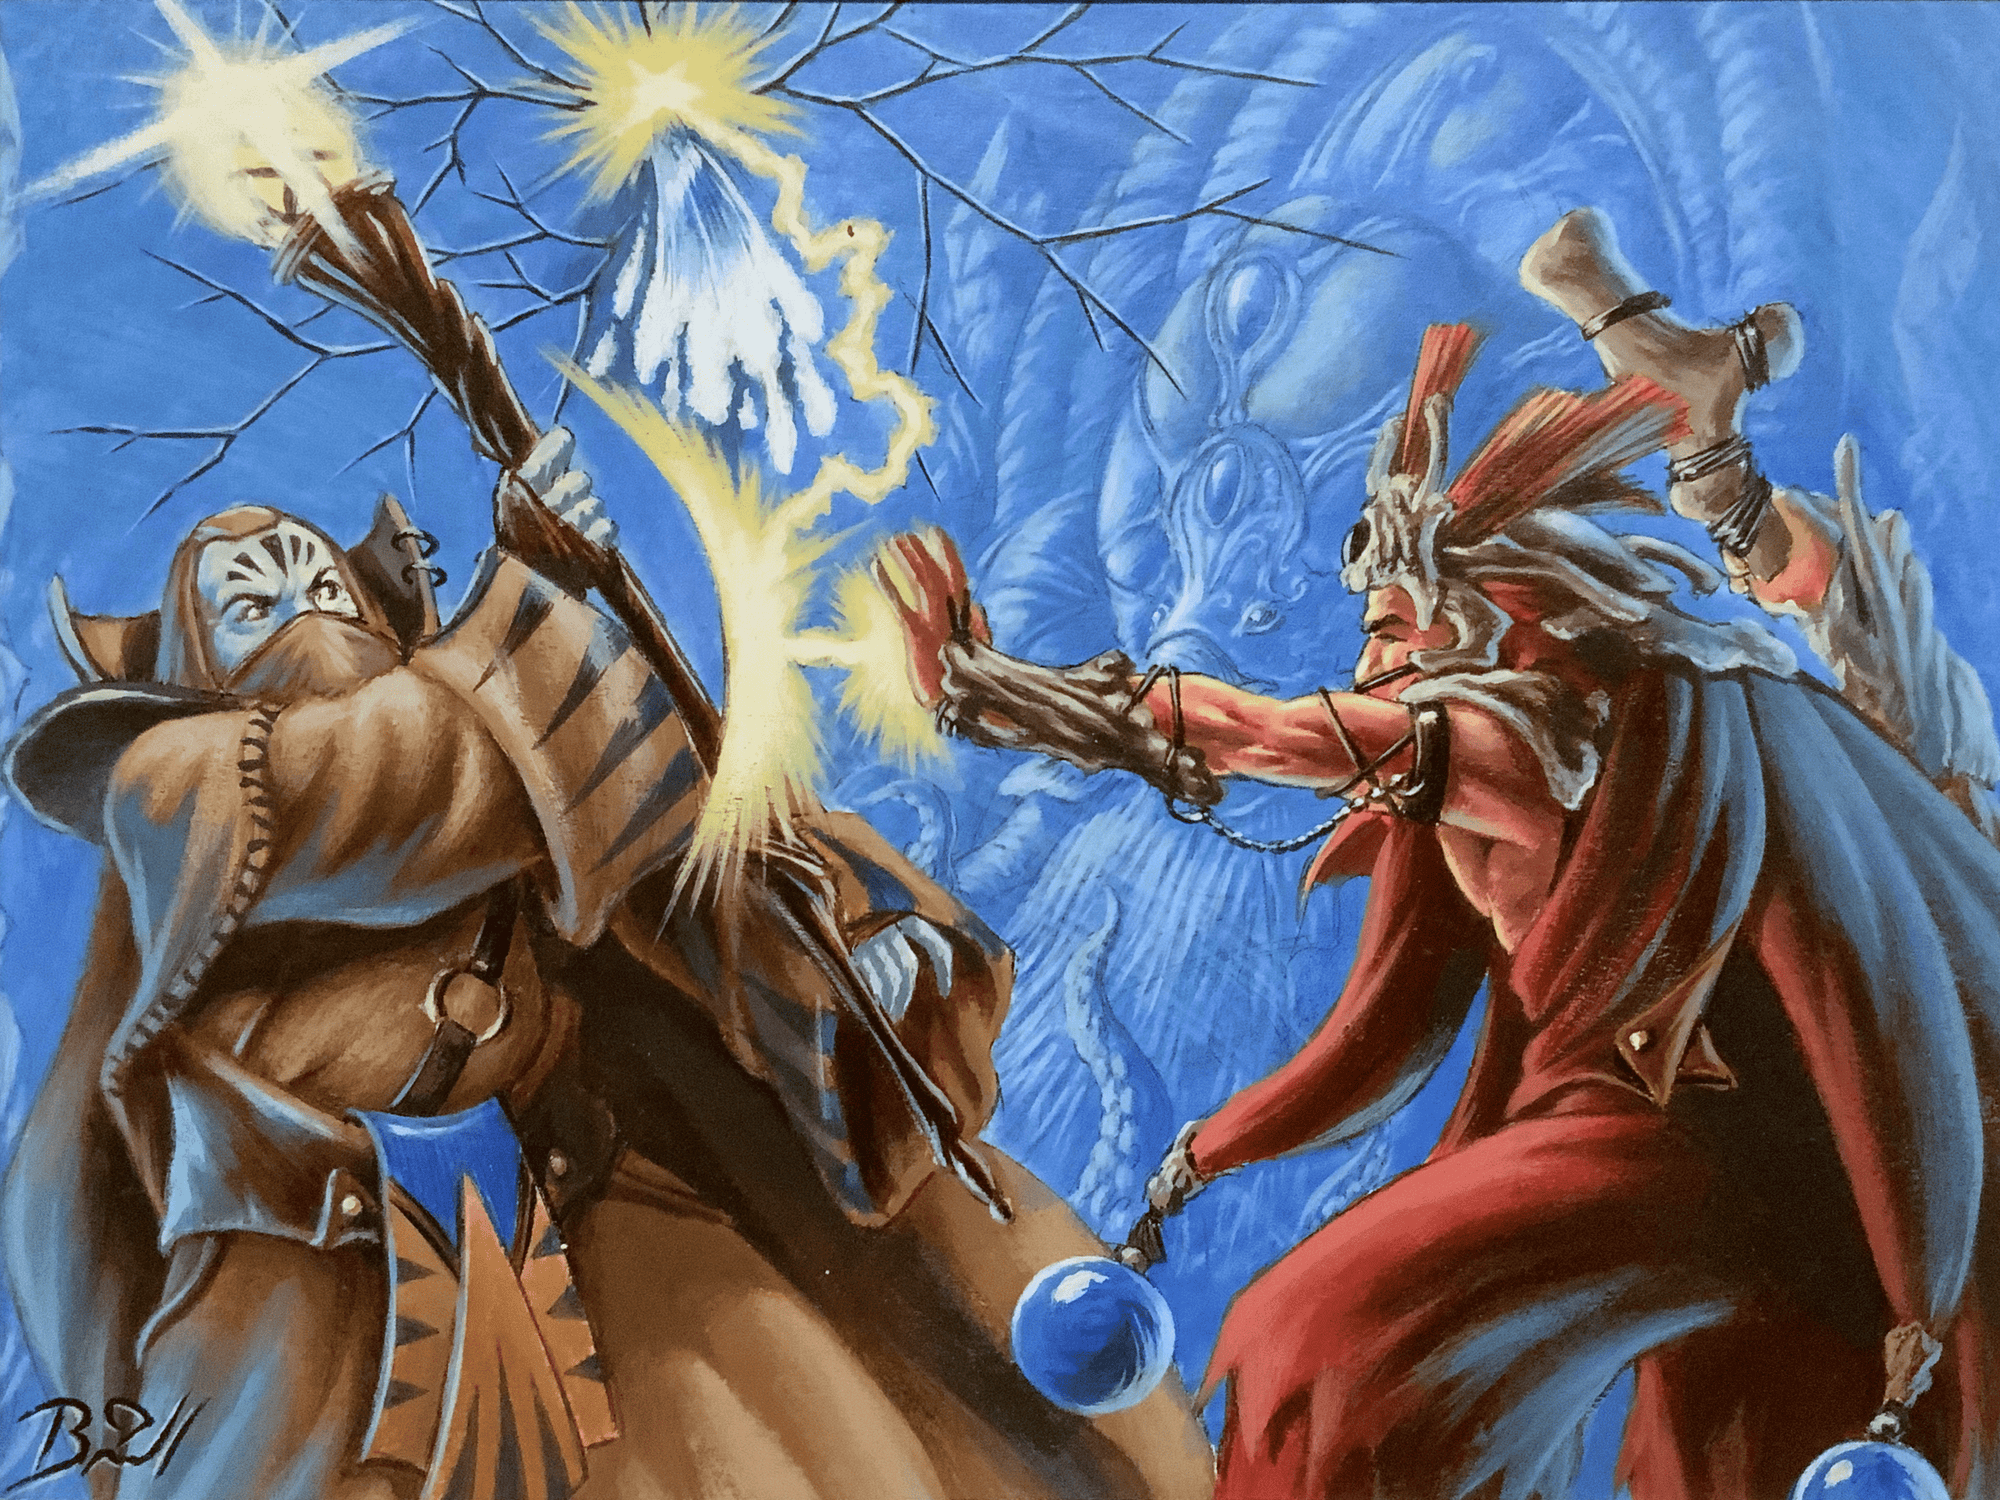 Battle of Wits by Mark Brill